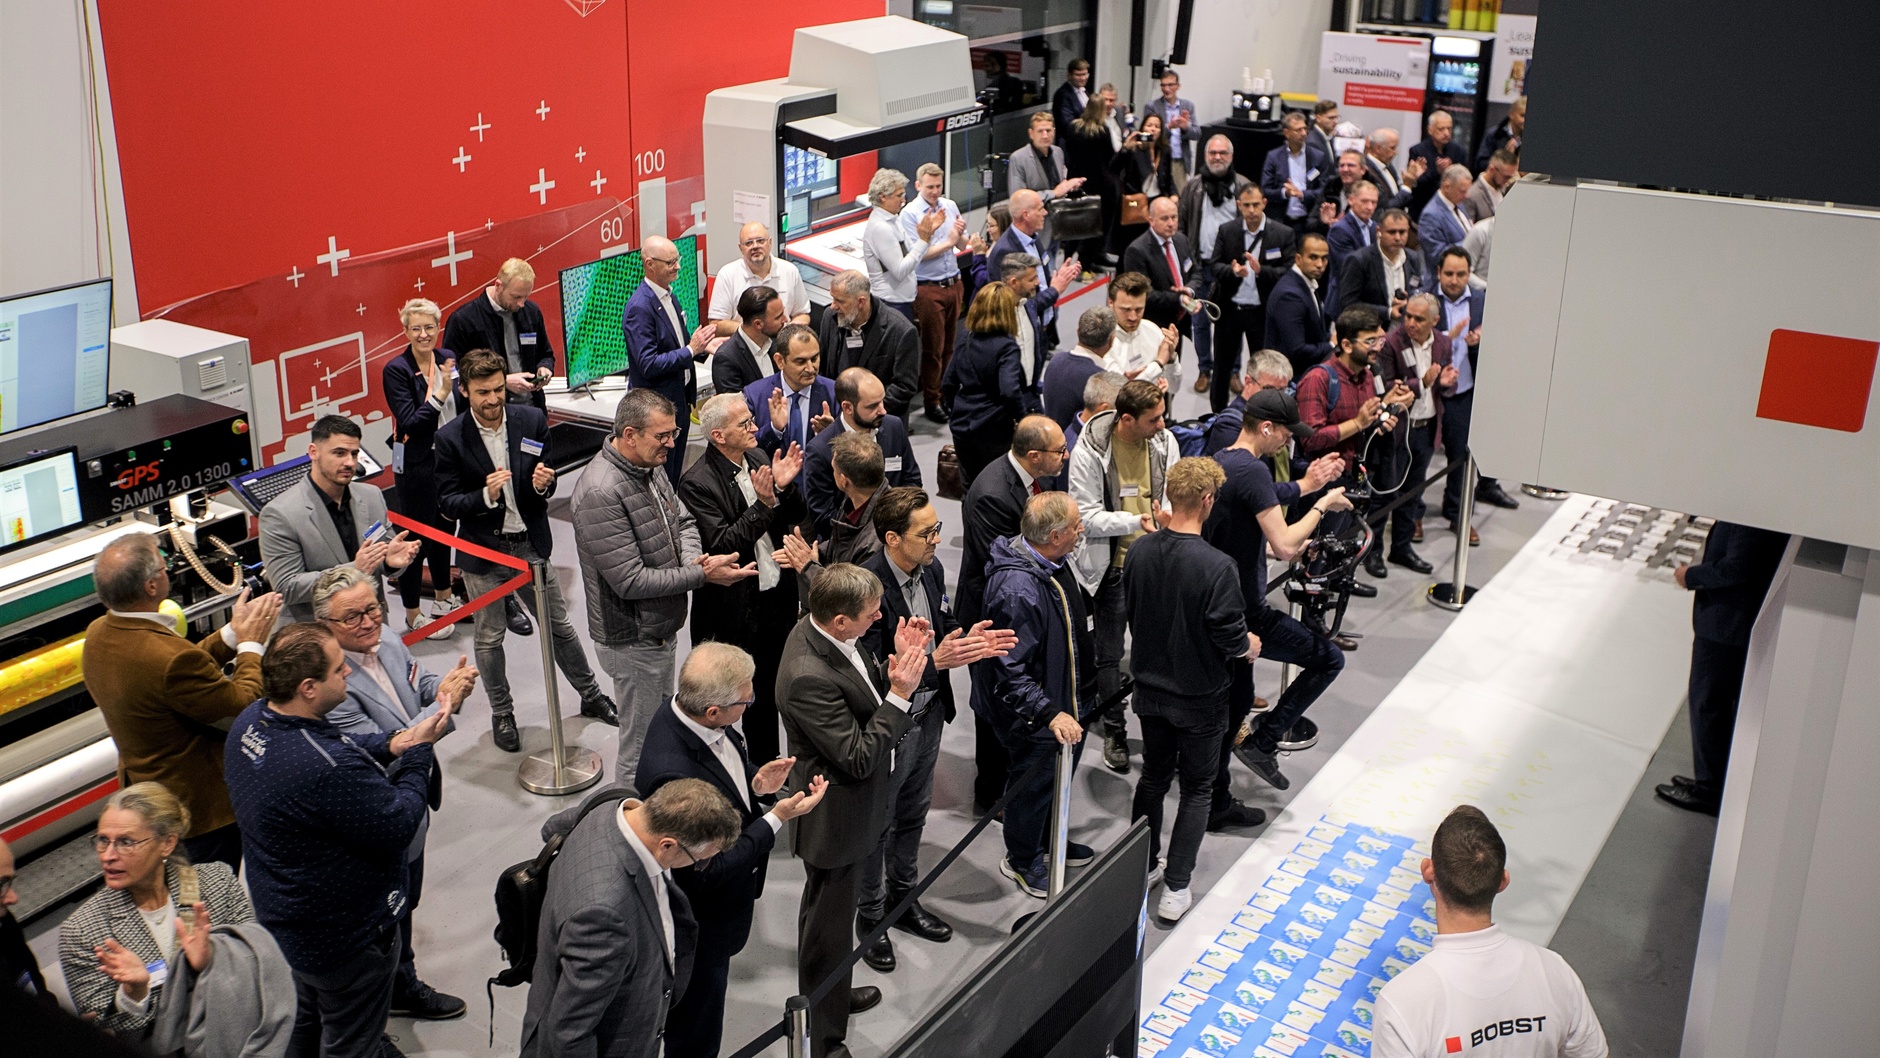 BOBST, alongside its industry partners, showcased the future of the packaging industry through comprehensive workflow solutions.